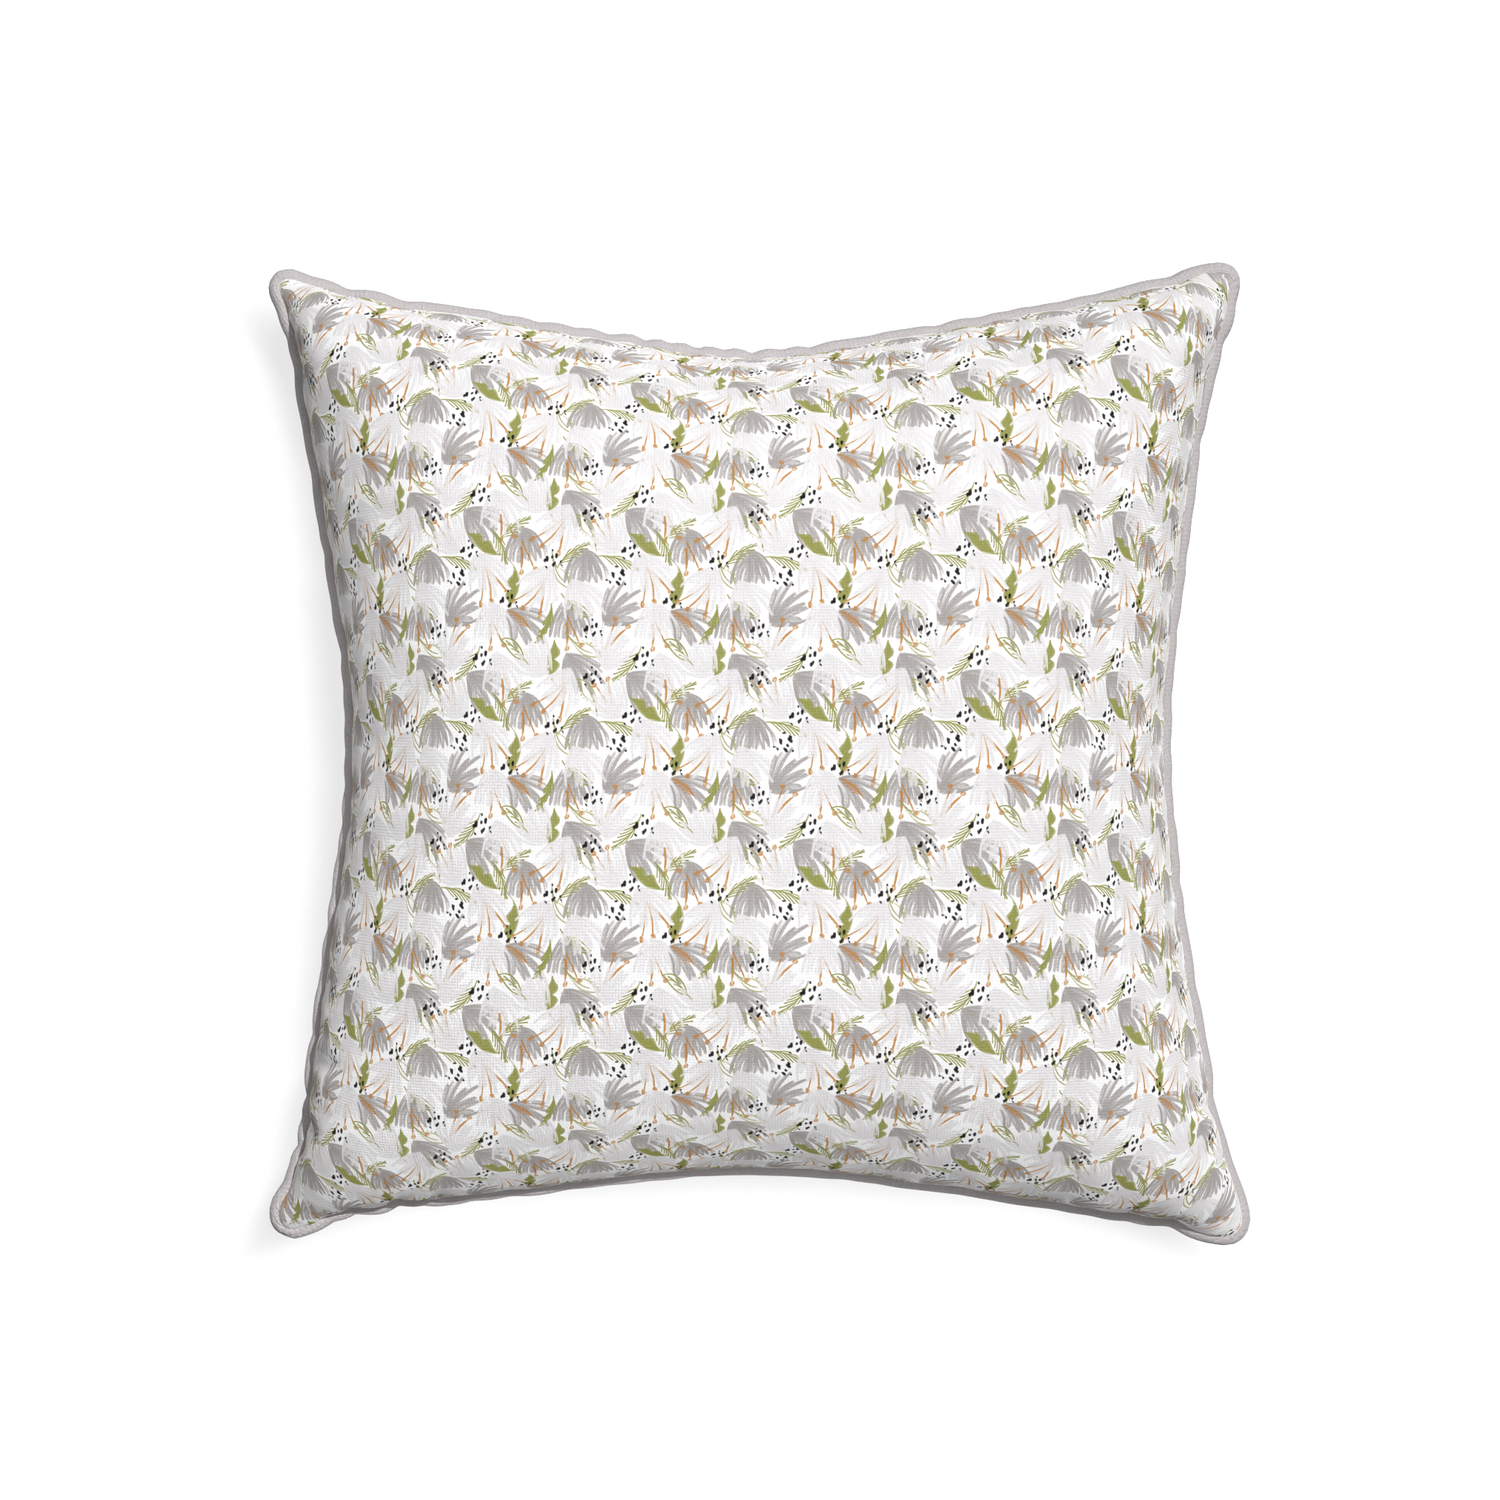 22-square eden grey custom pillow with pebble piping on white background